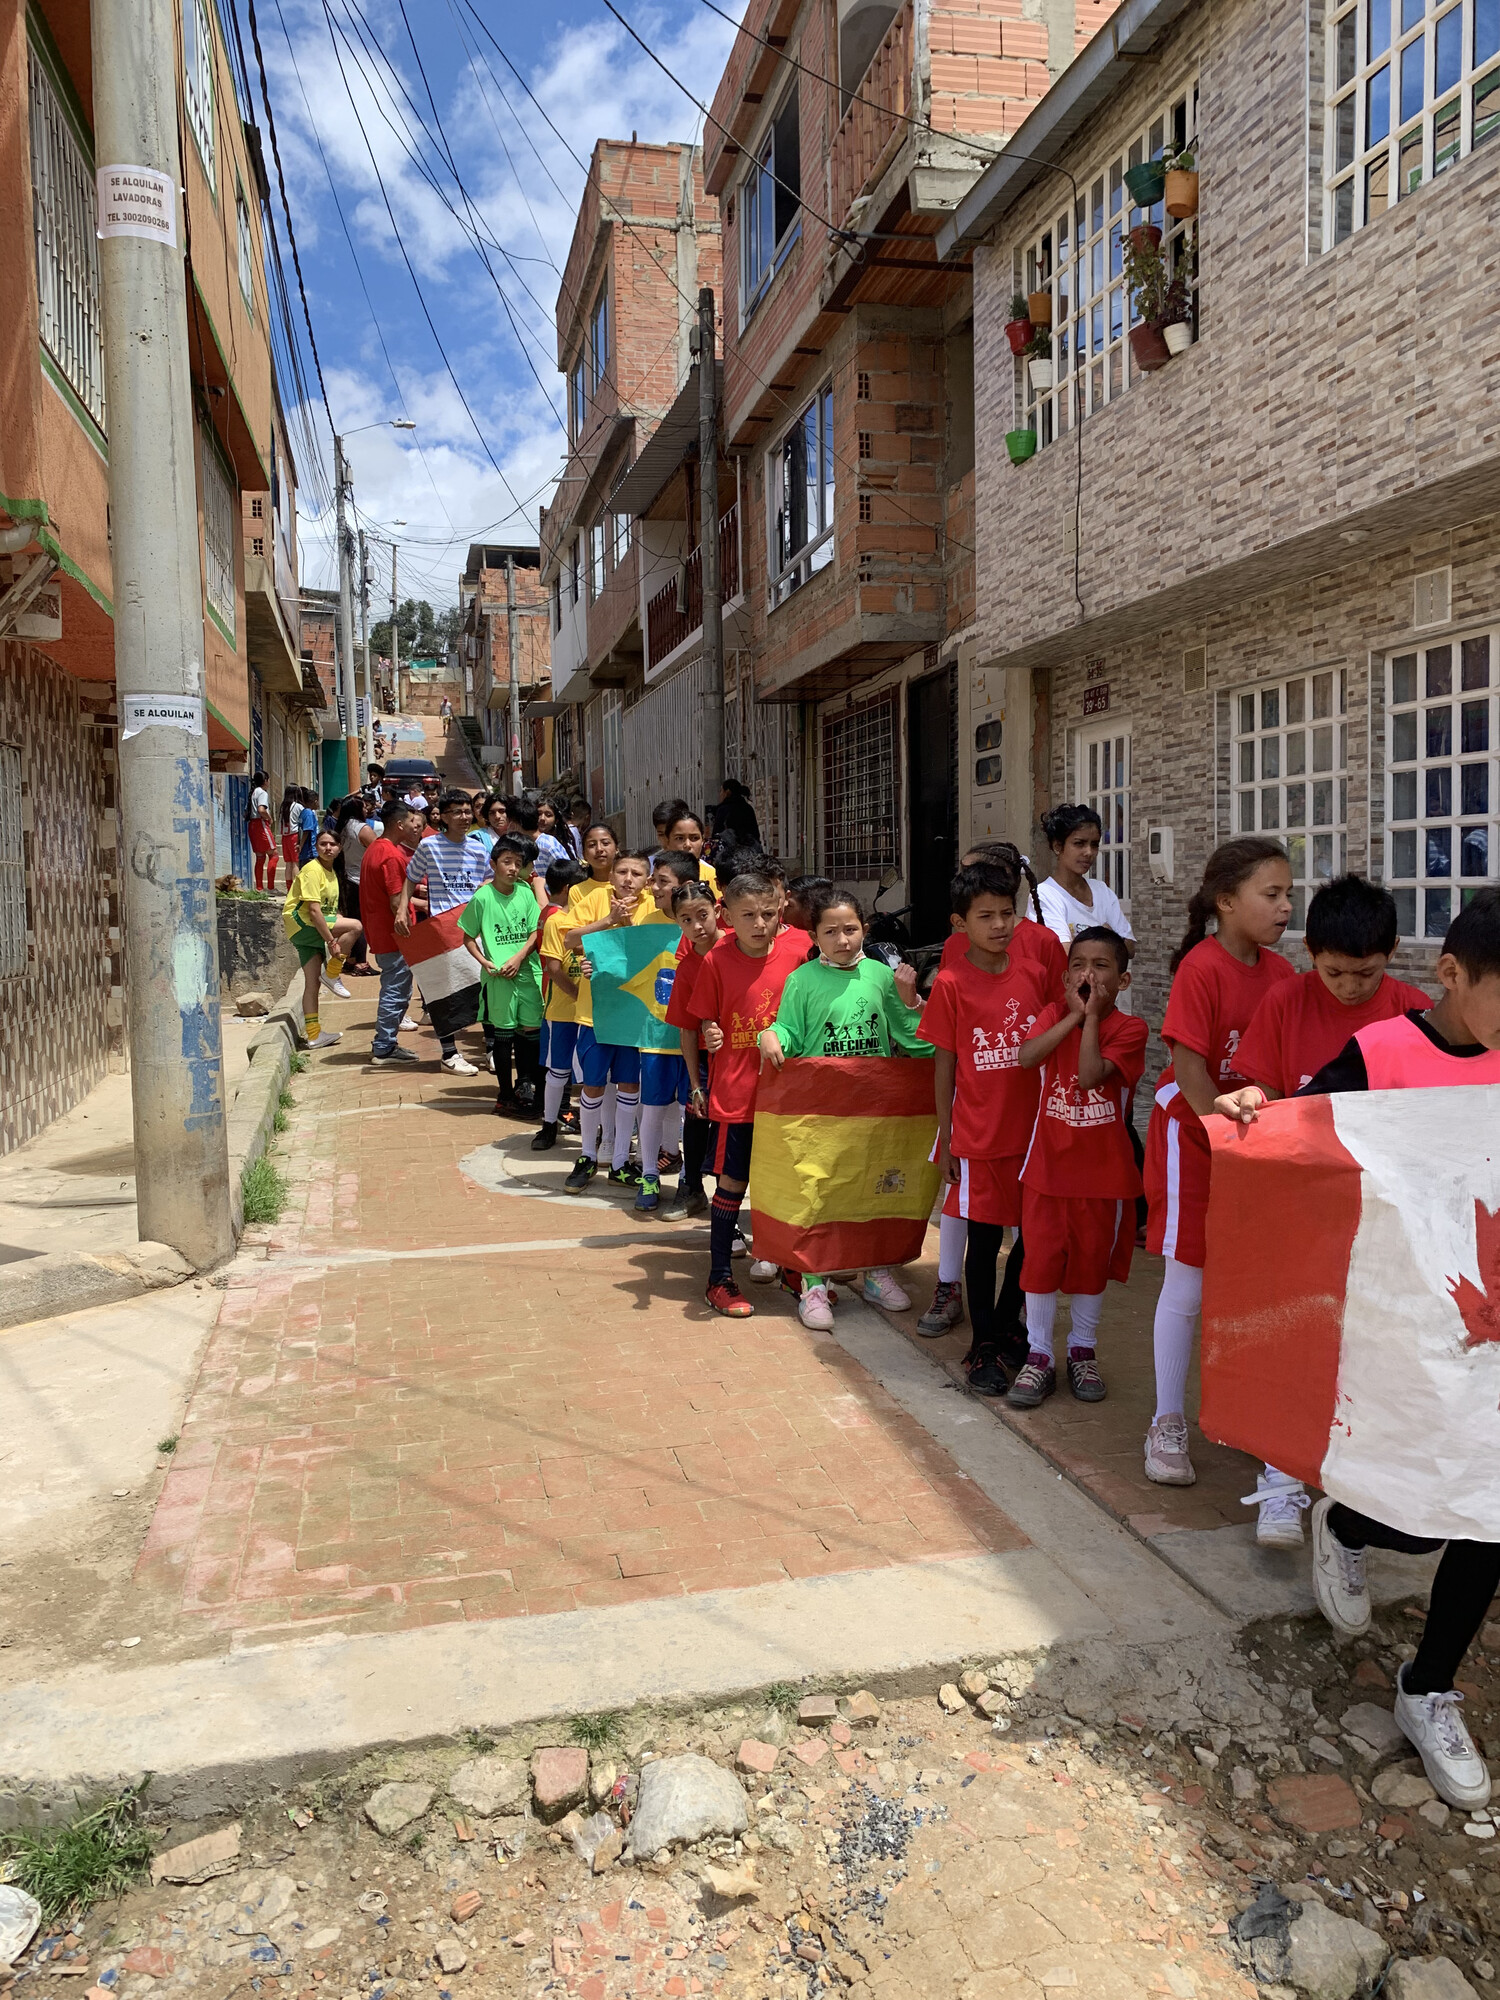 Children stand in a long line on a narrow street in Colombia. A few of them are holding different country flags.